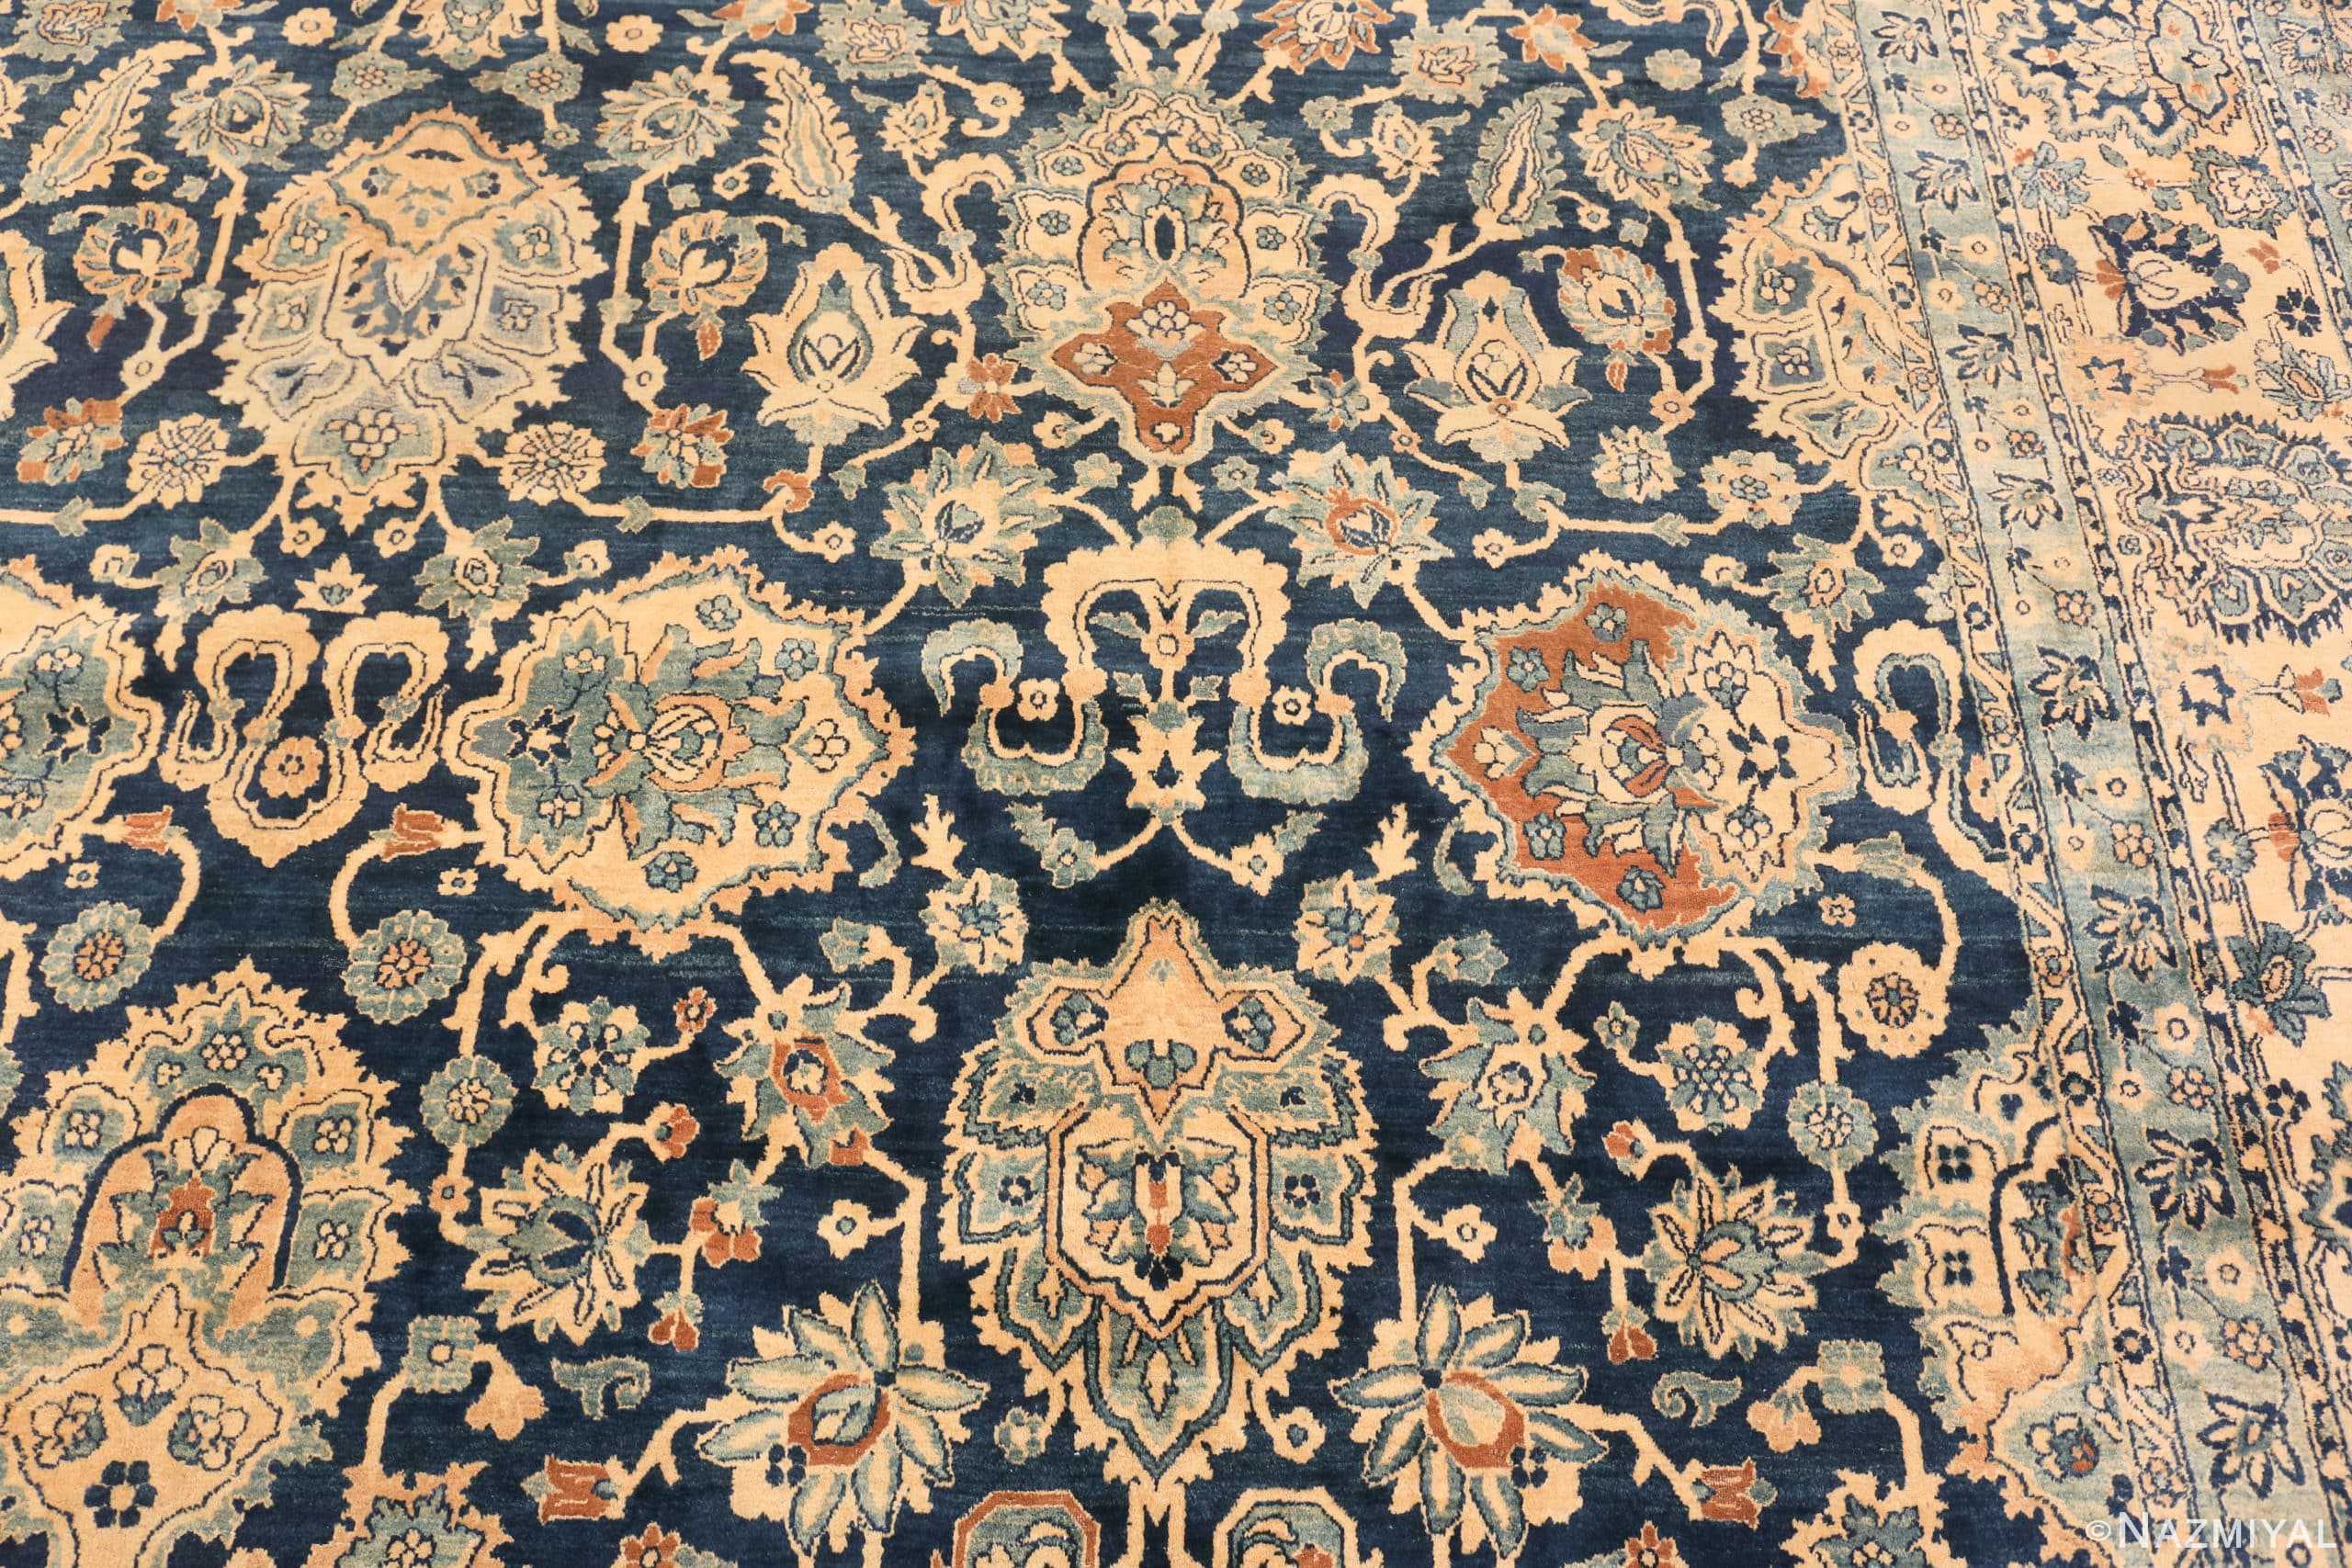 Details Of Oversized Antique Persian Kerman Rug 70932 by Nazmiyal Antique Rugs